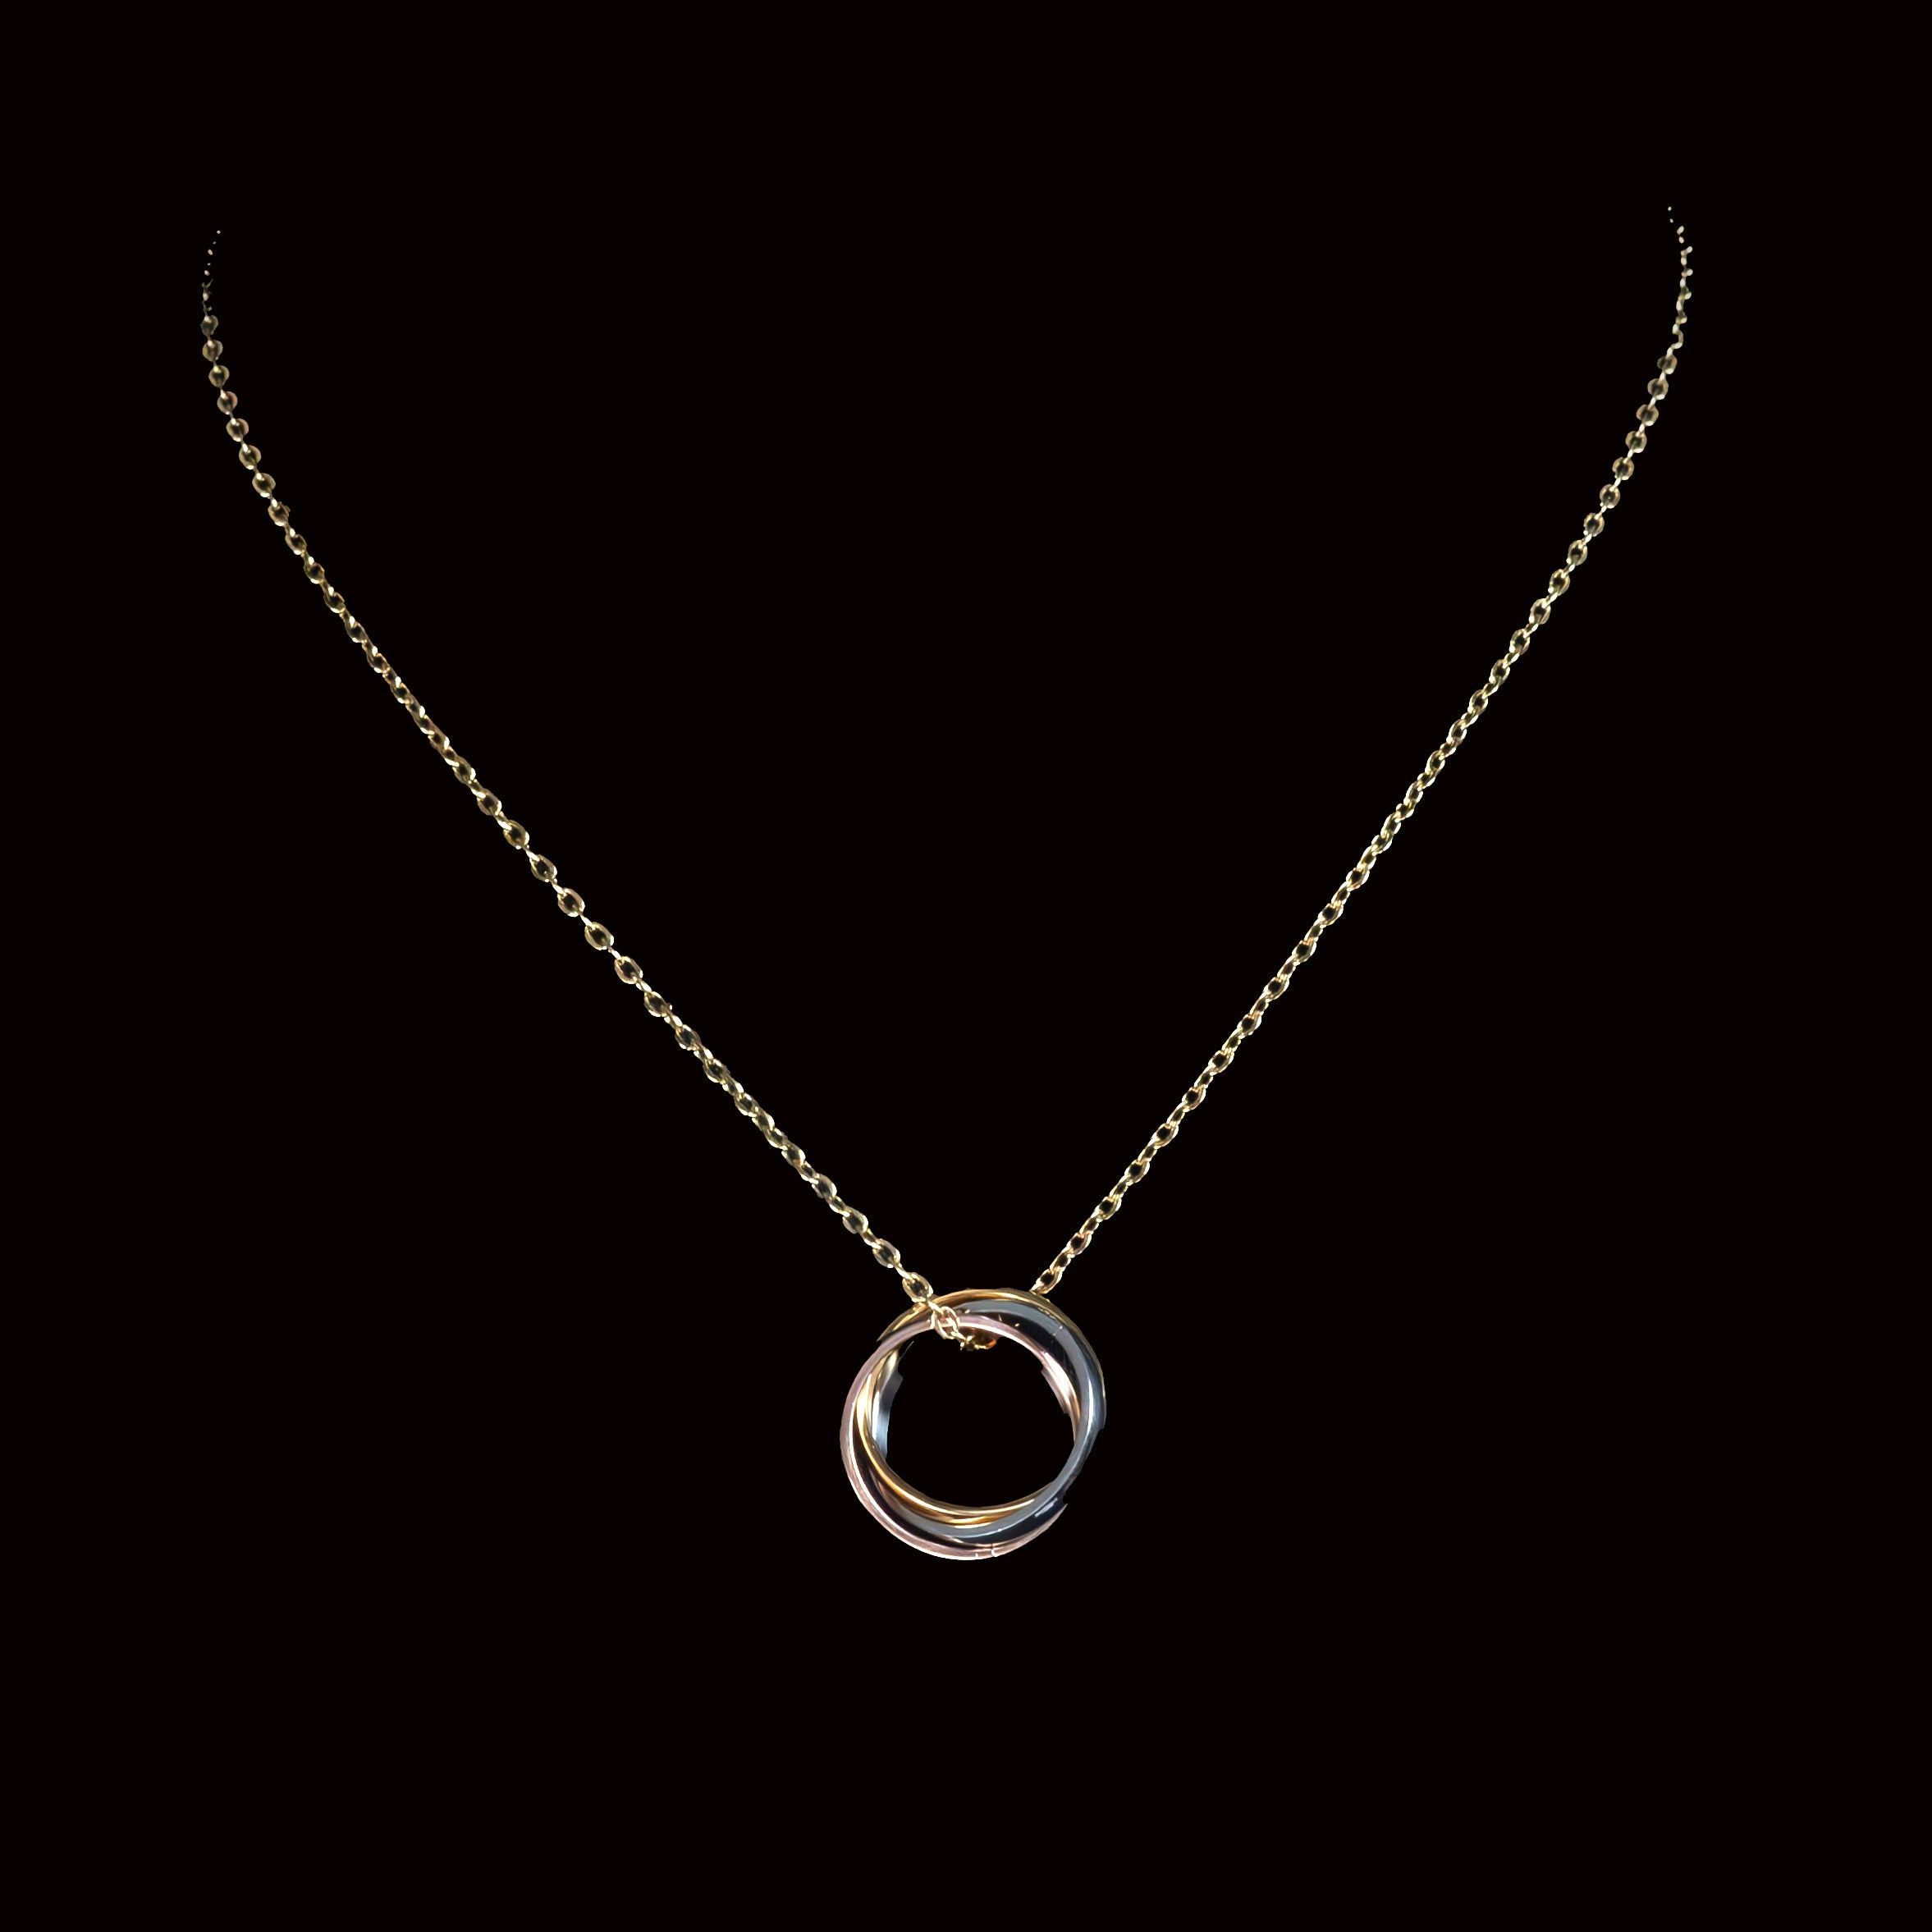 Jack Stainless Steel Necklace with Interlock Pendant